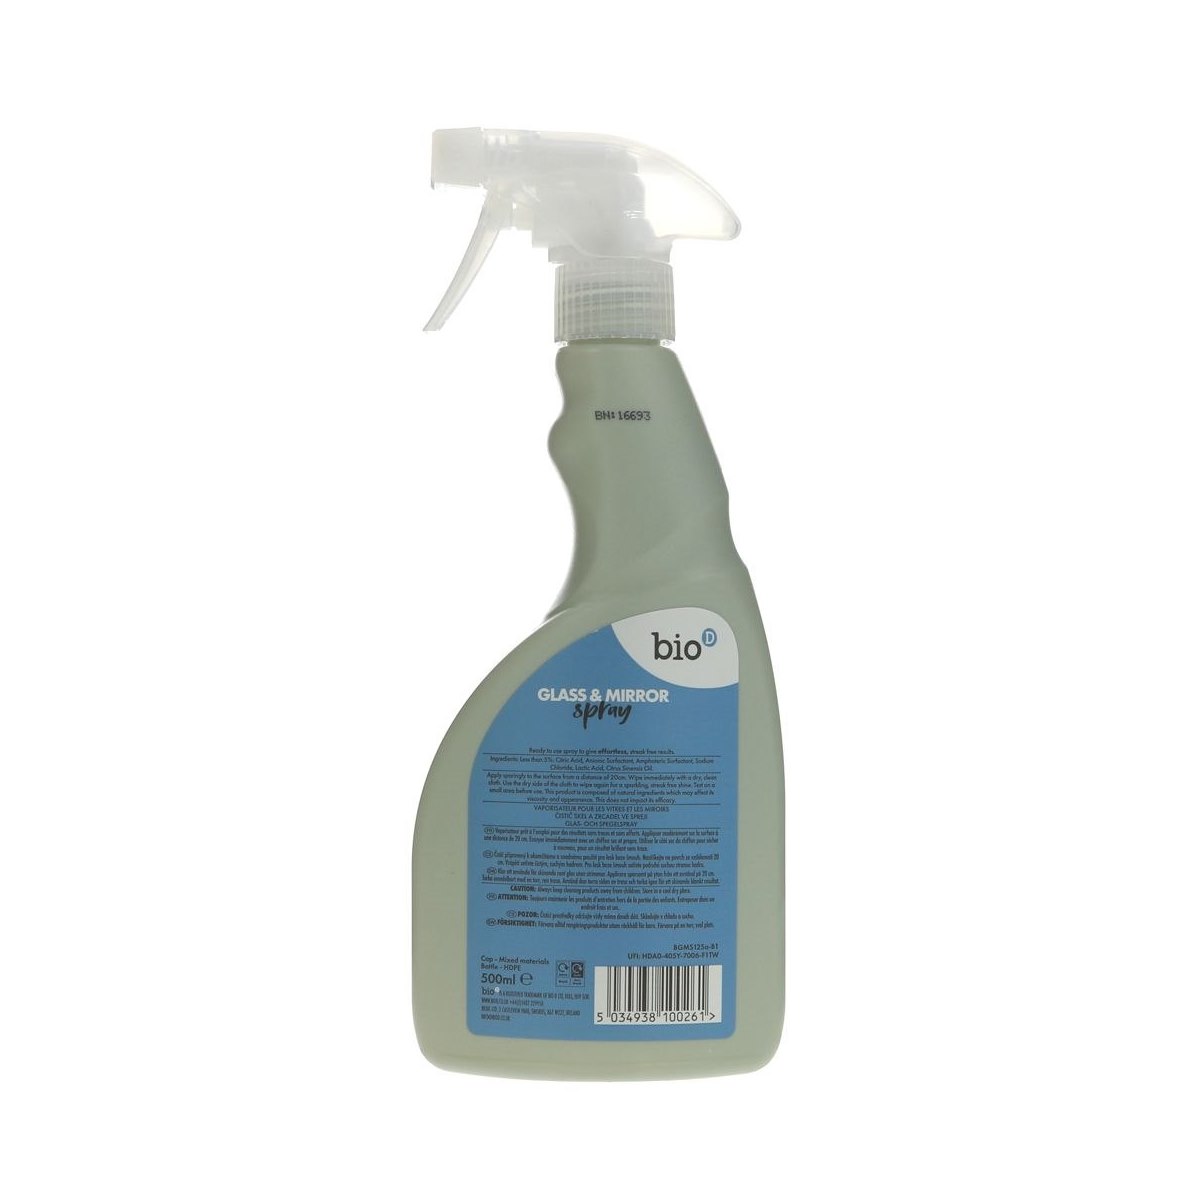 Bio-D Glass and Mirror Cleaner